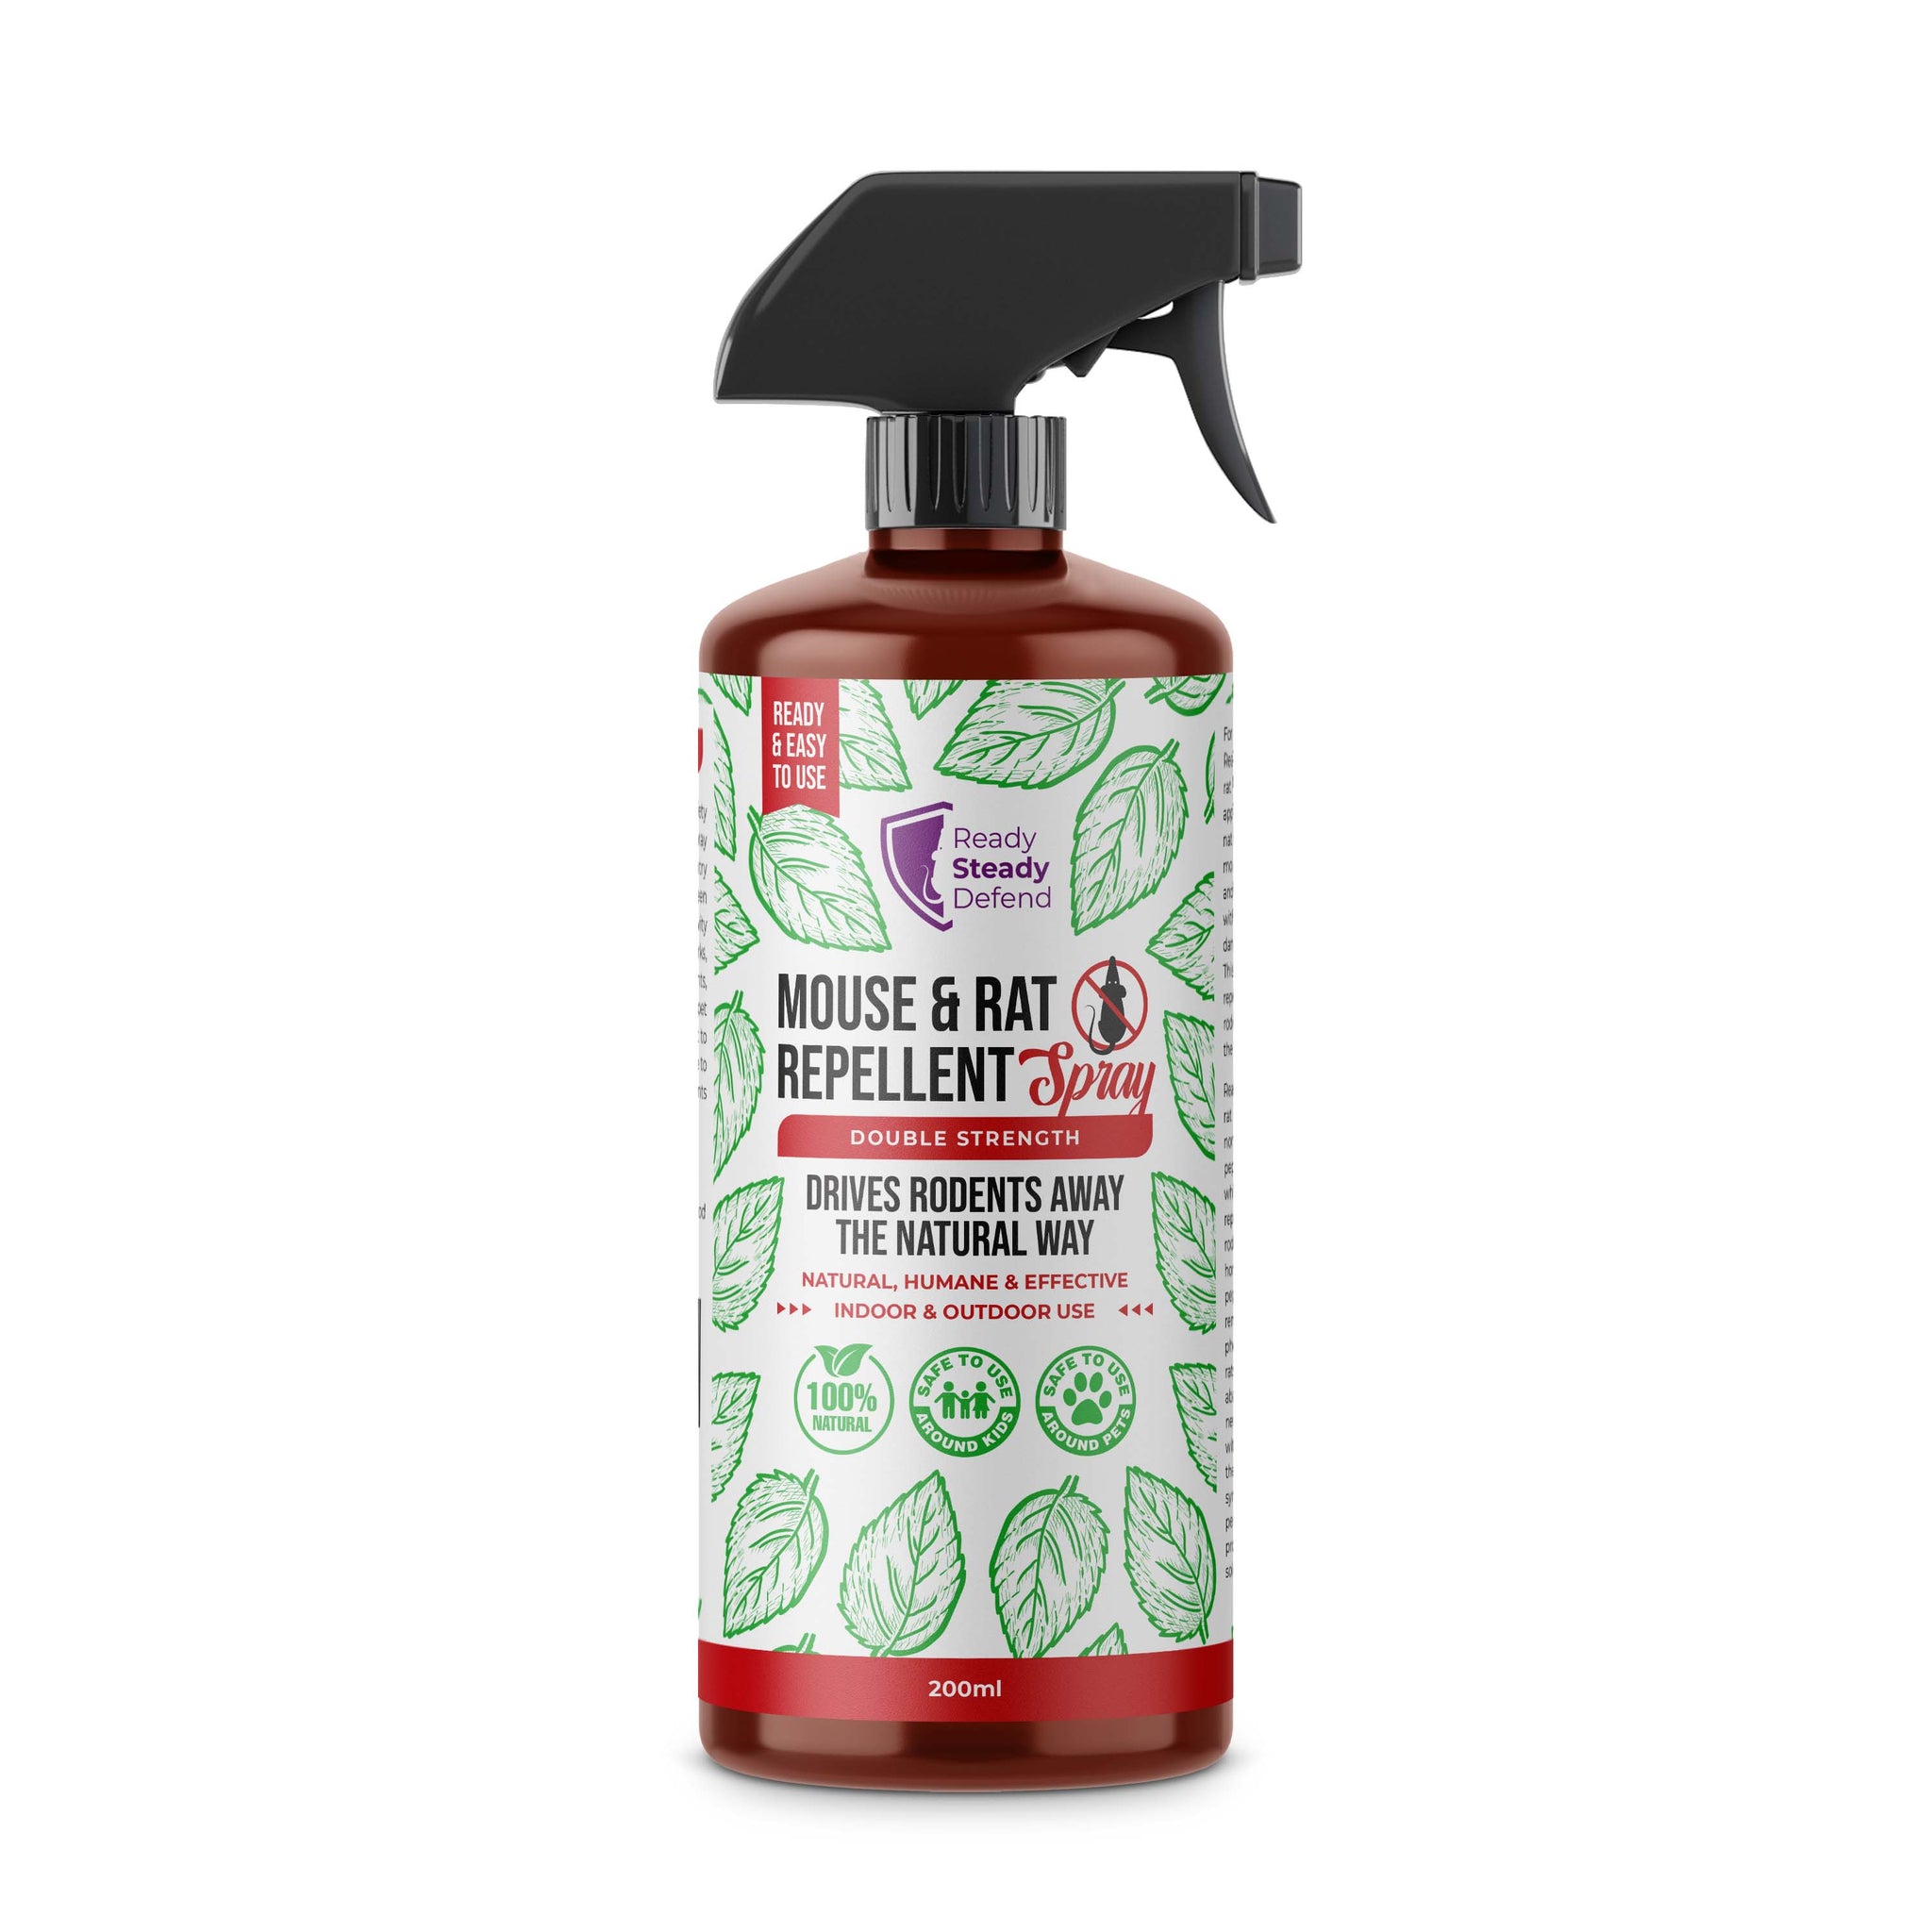 Natural Mouse & Rat Repellent Spray (200ml)